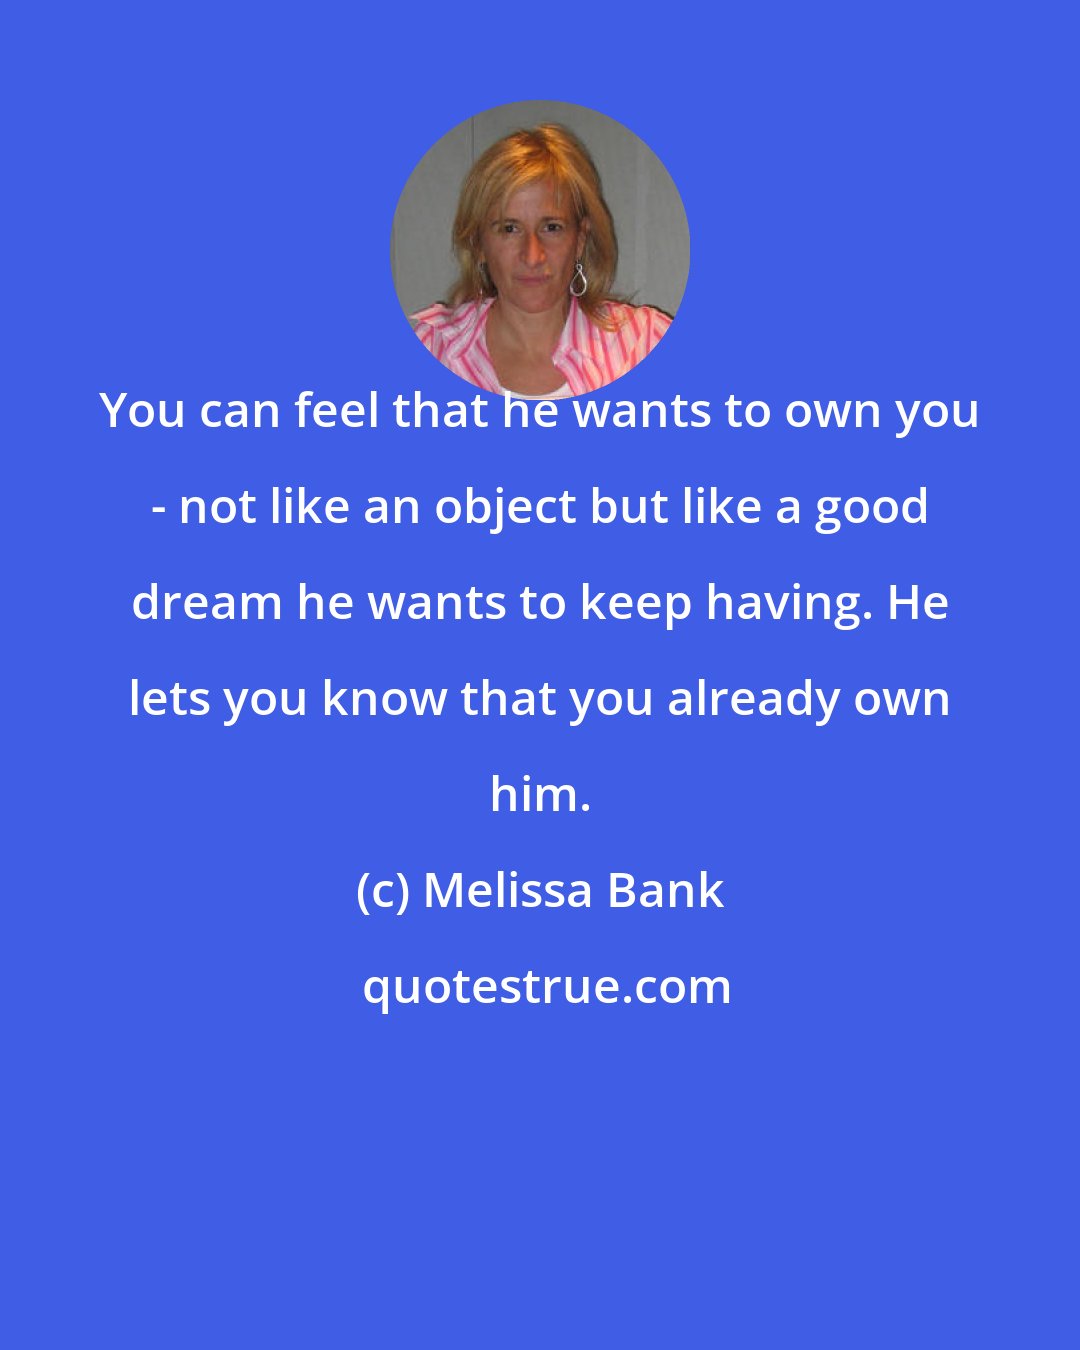 Melissa Bank: You can feel that he wants to own you - not like an object but like a good dream he wants to keep having. He lets you know that you already own him.